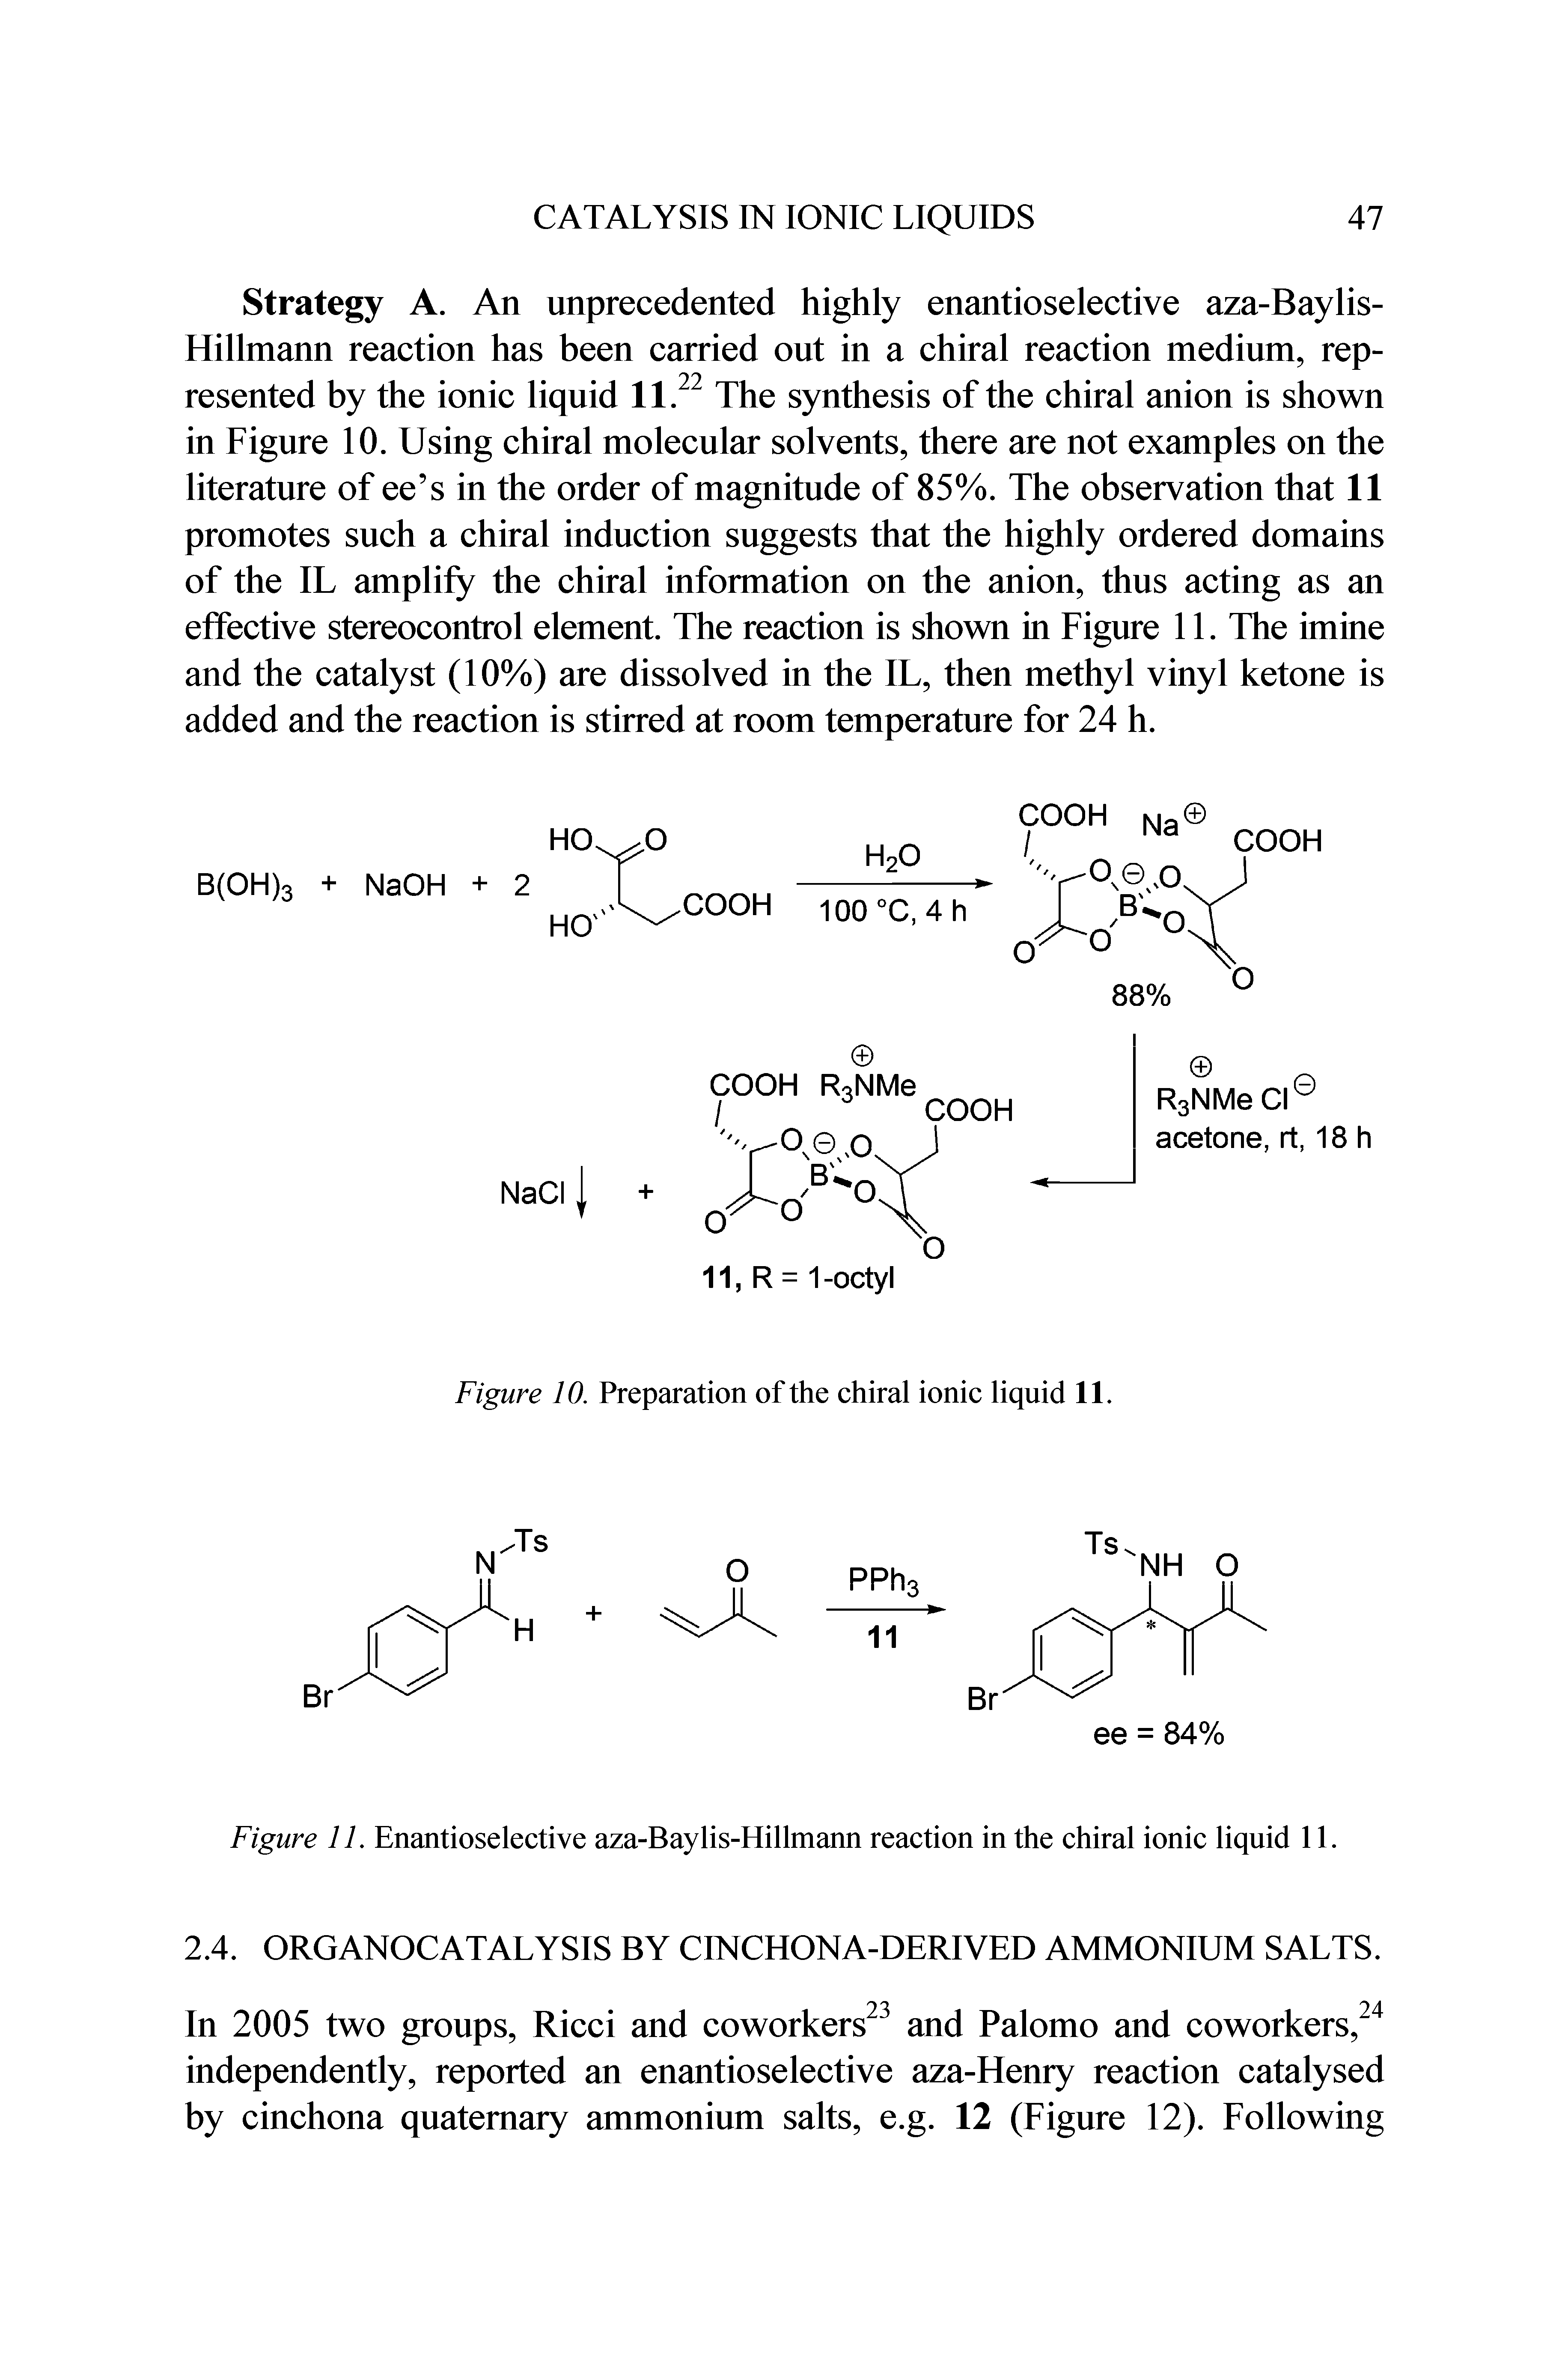 Figure 11. Enantioselective aza-Baylis-Hillmann reaction in the chiral ionic liquid 11.